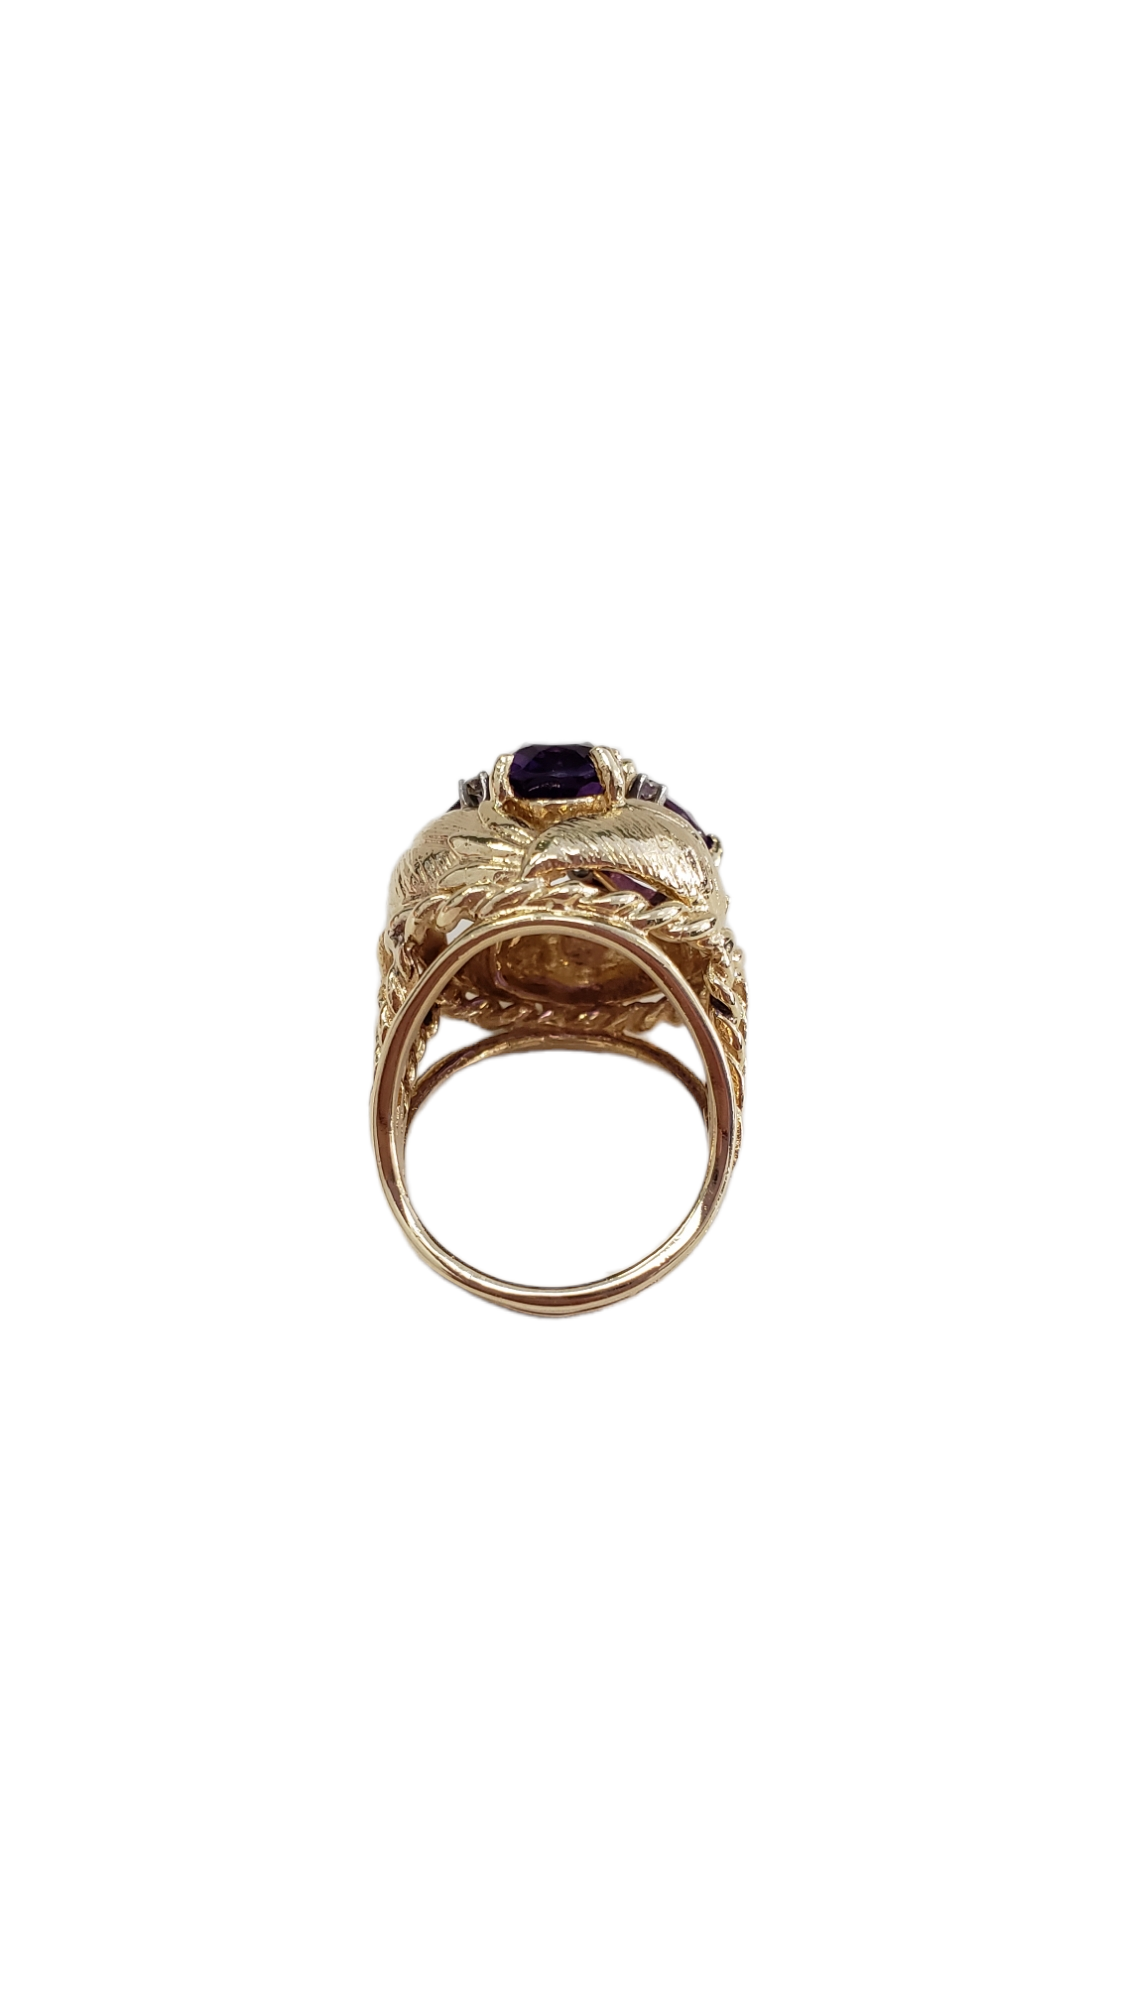 14K Yellow Gold Amethyst and Diamond Ring Size 6 (US)